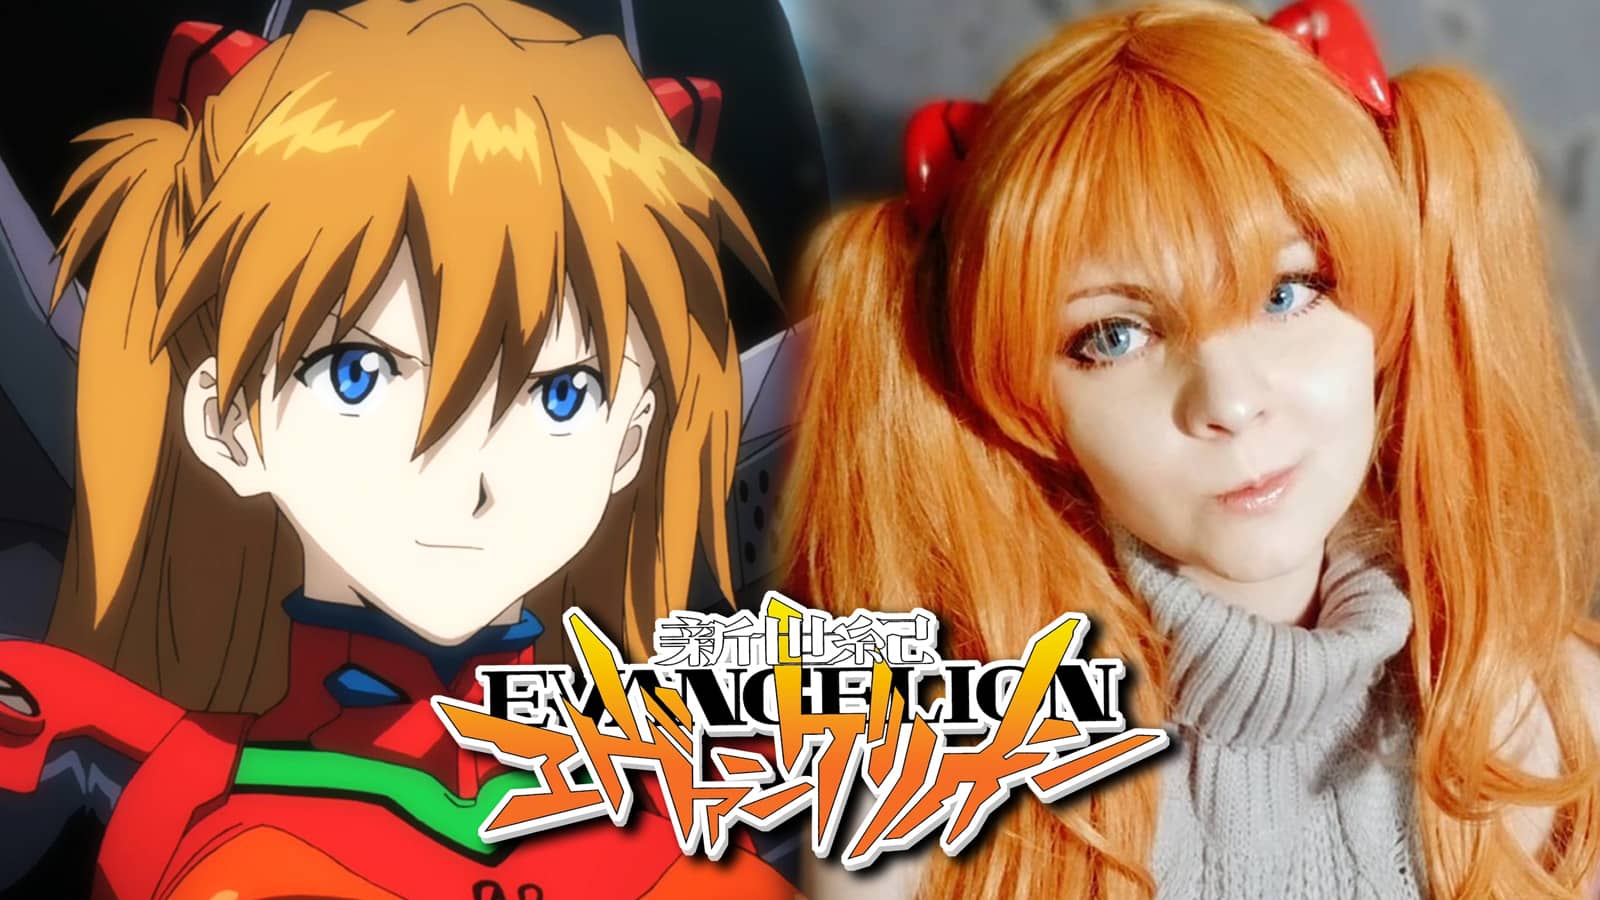 Screenshot of Asuka Langley from Evangelion anime next to cosplayer.